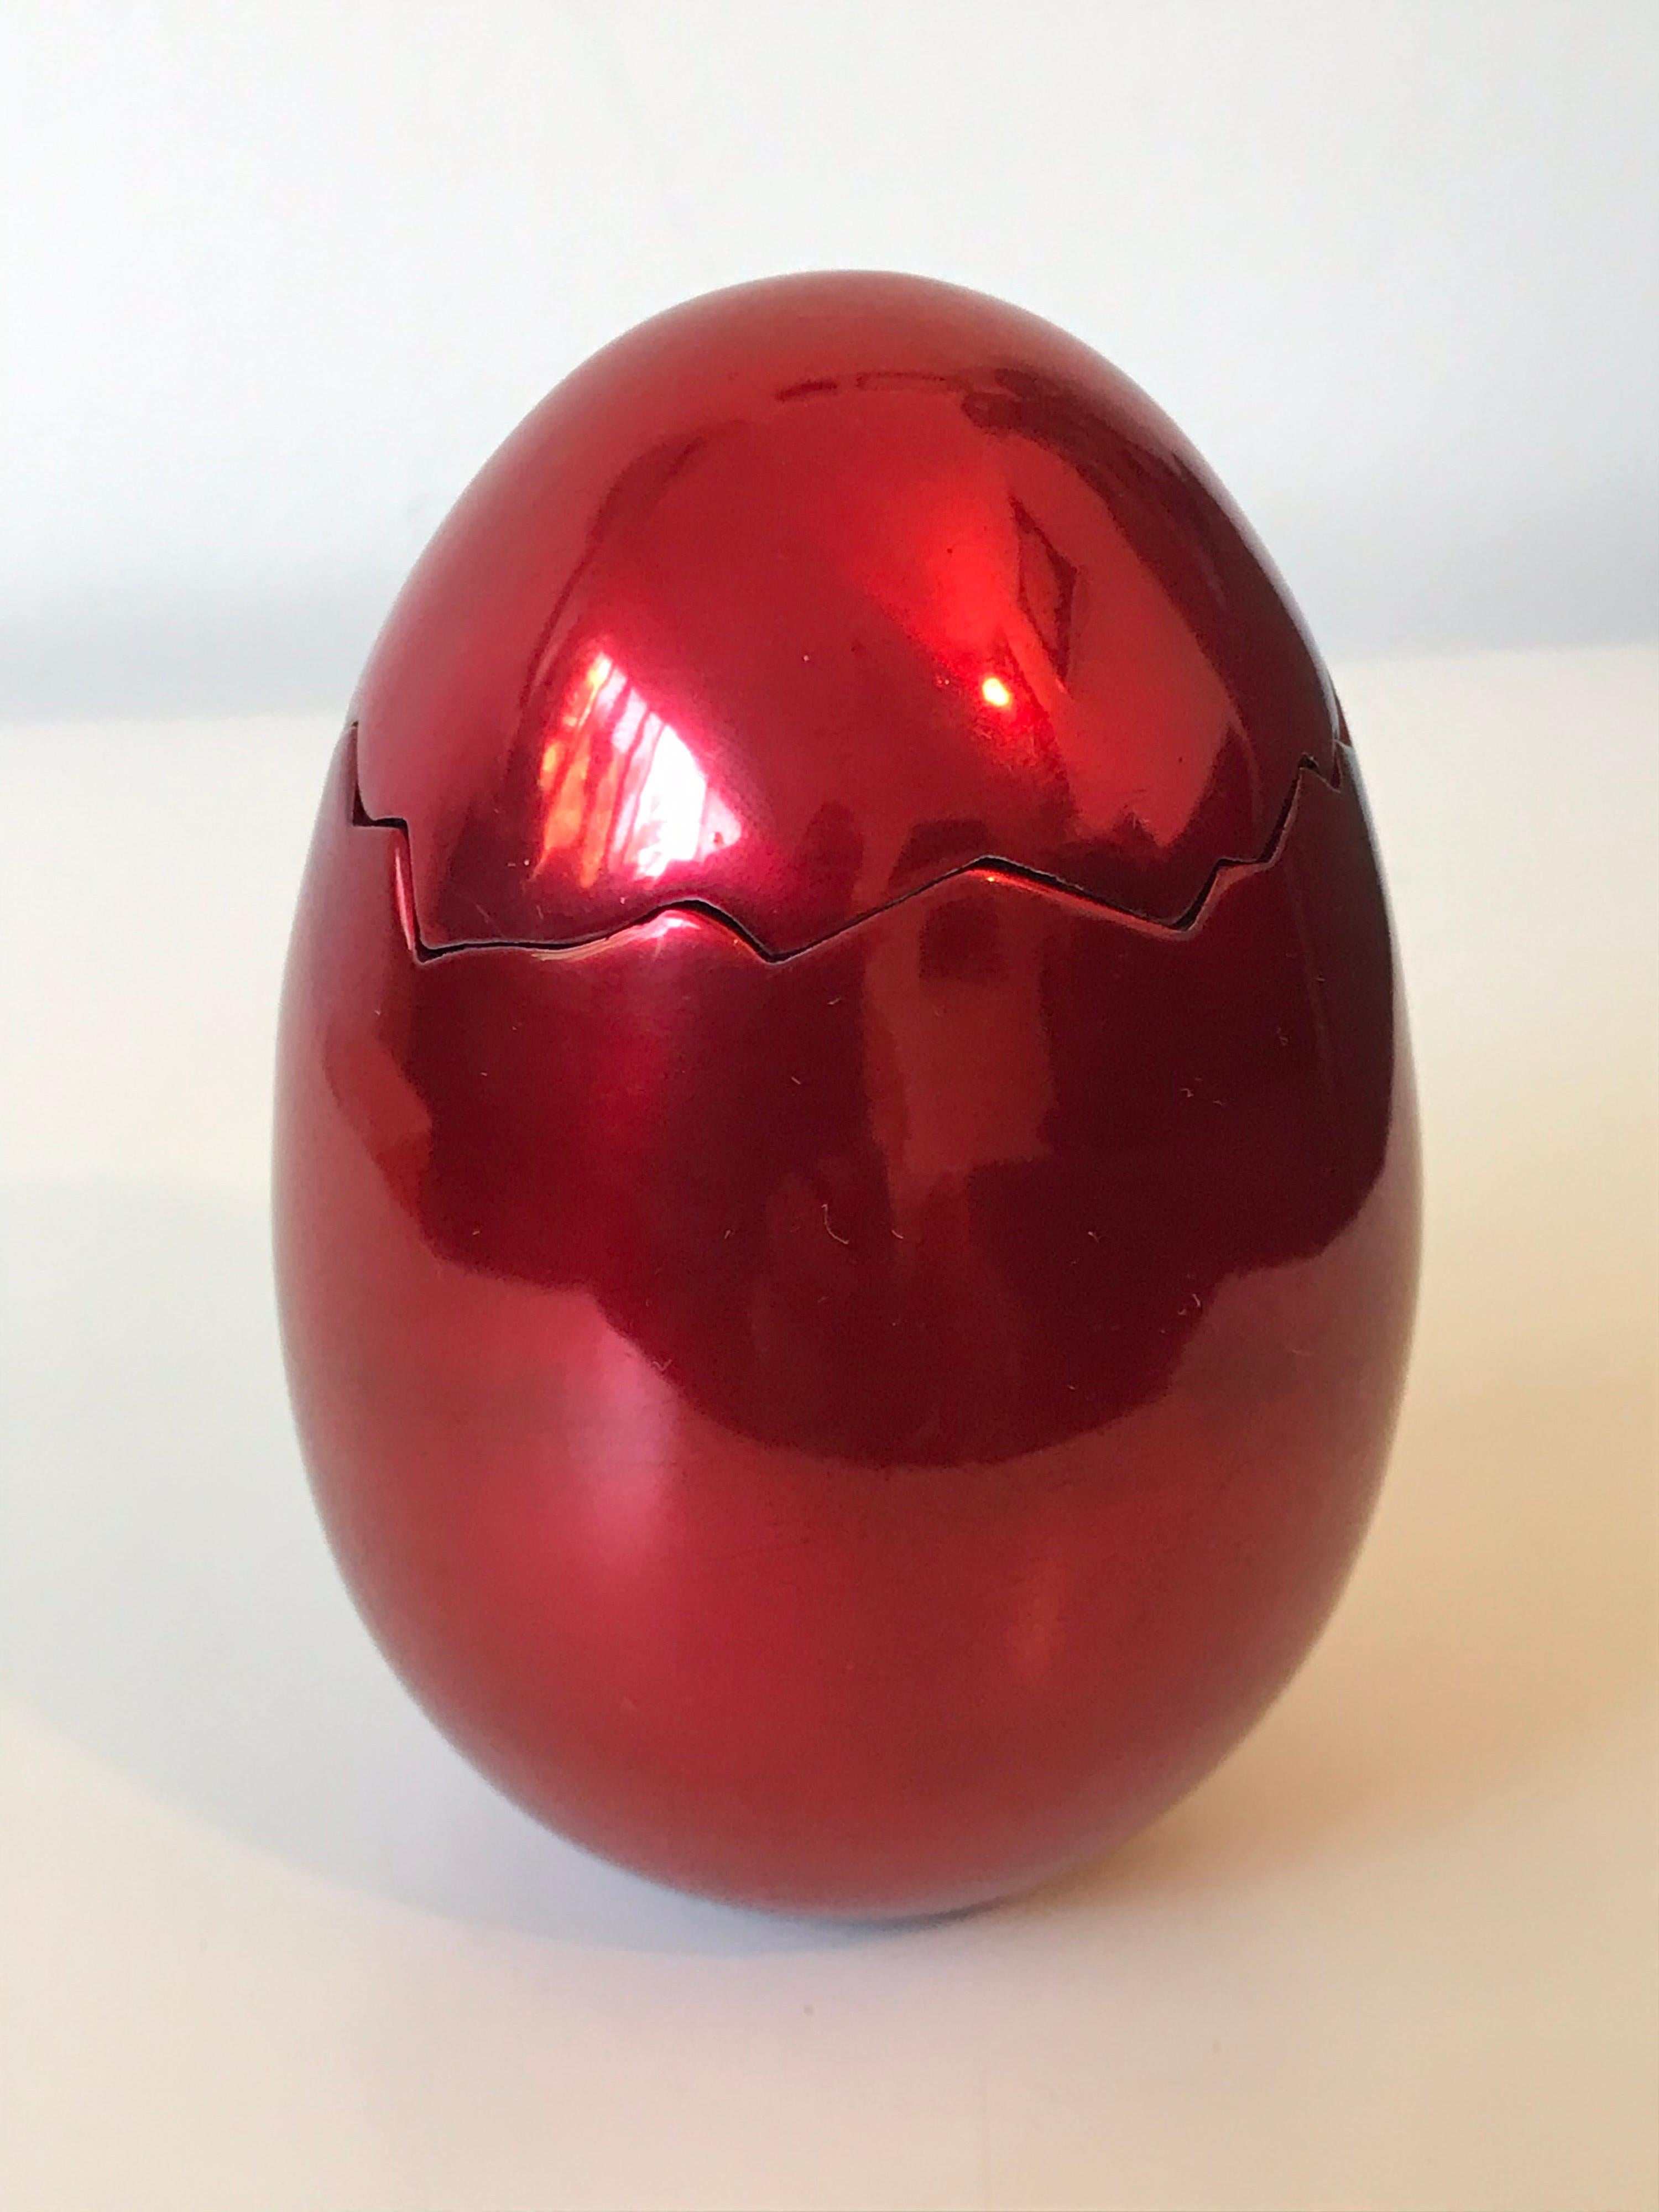 American After Jeff Koons Small Cracked Egg Sculpture Invitation, 2008